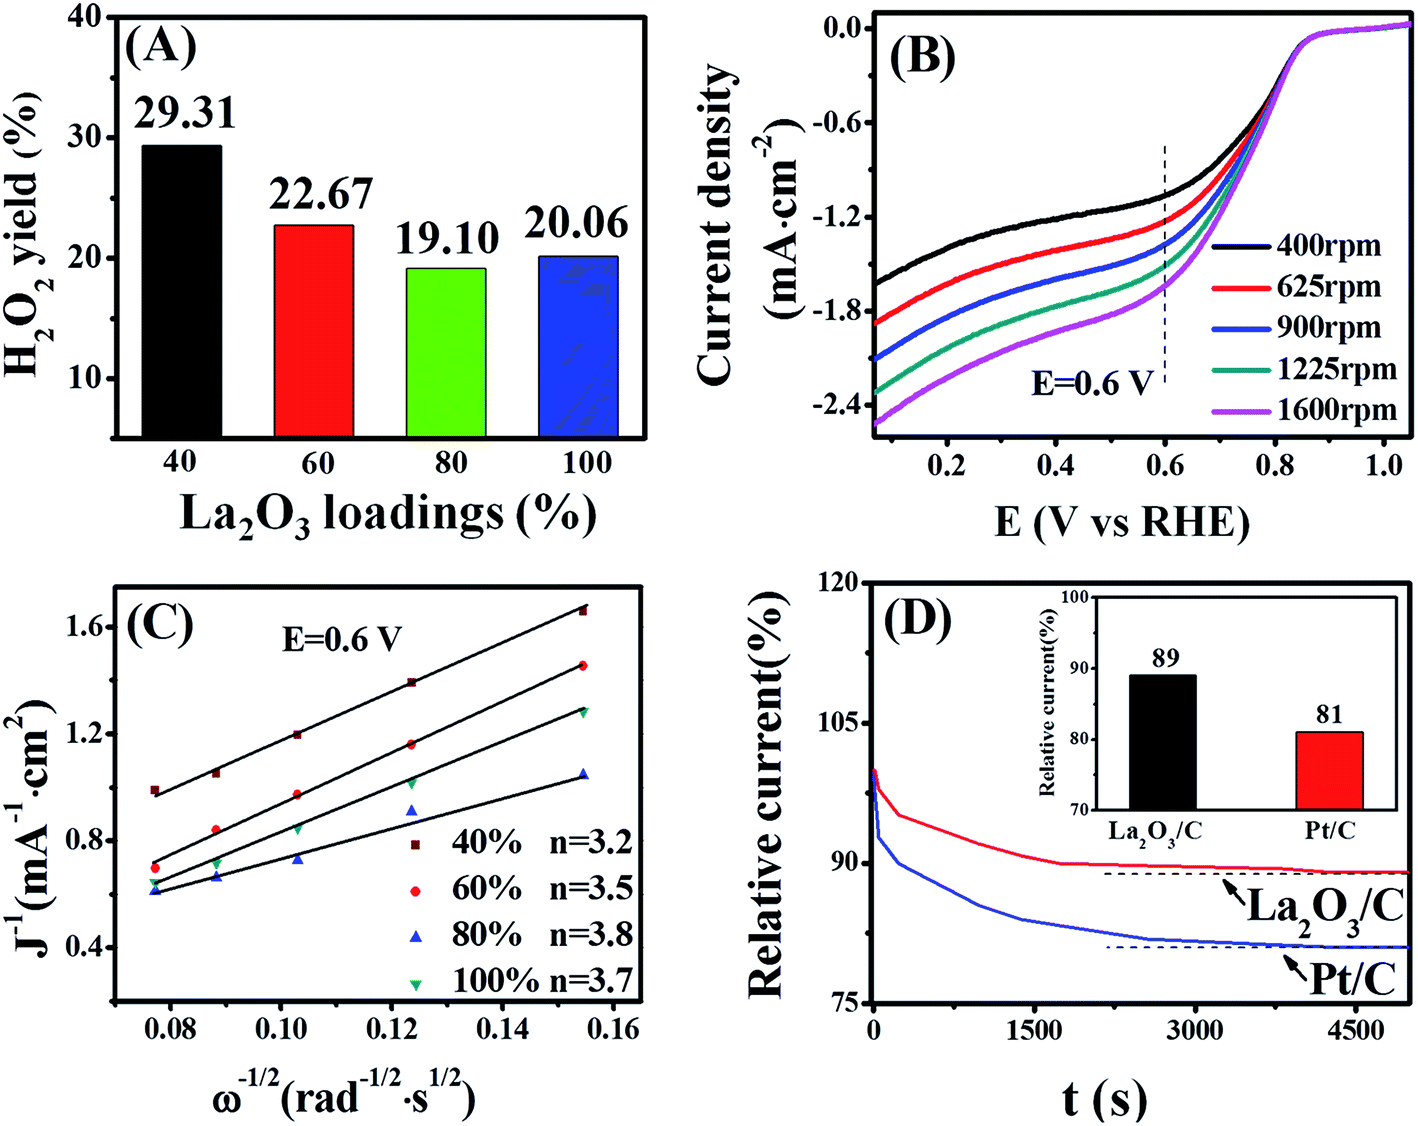 Toward synergy of carbon and La 2 O 3 in their hybrid as an 